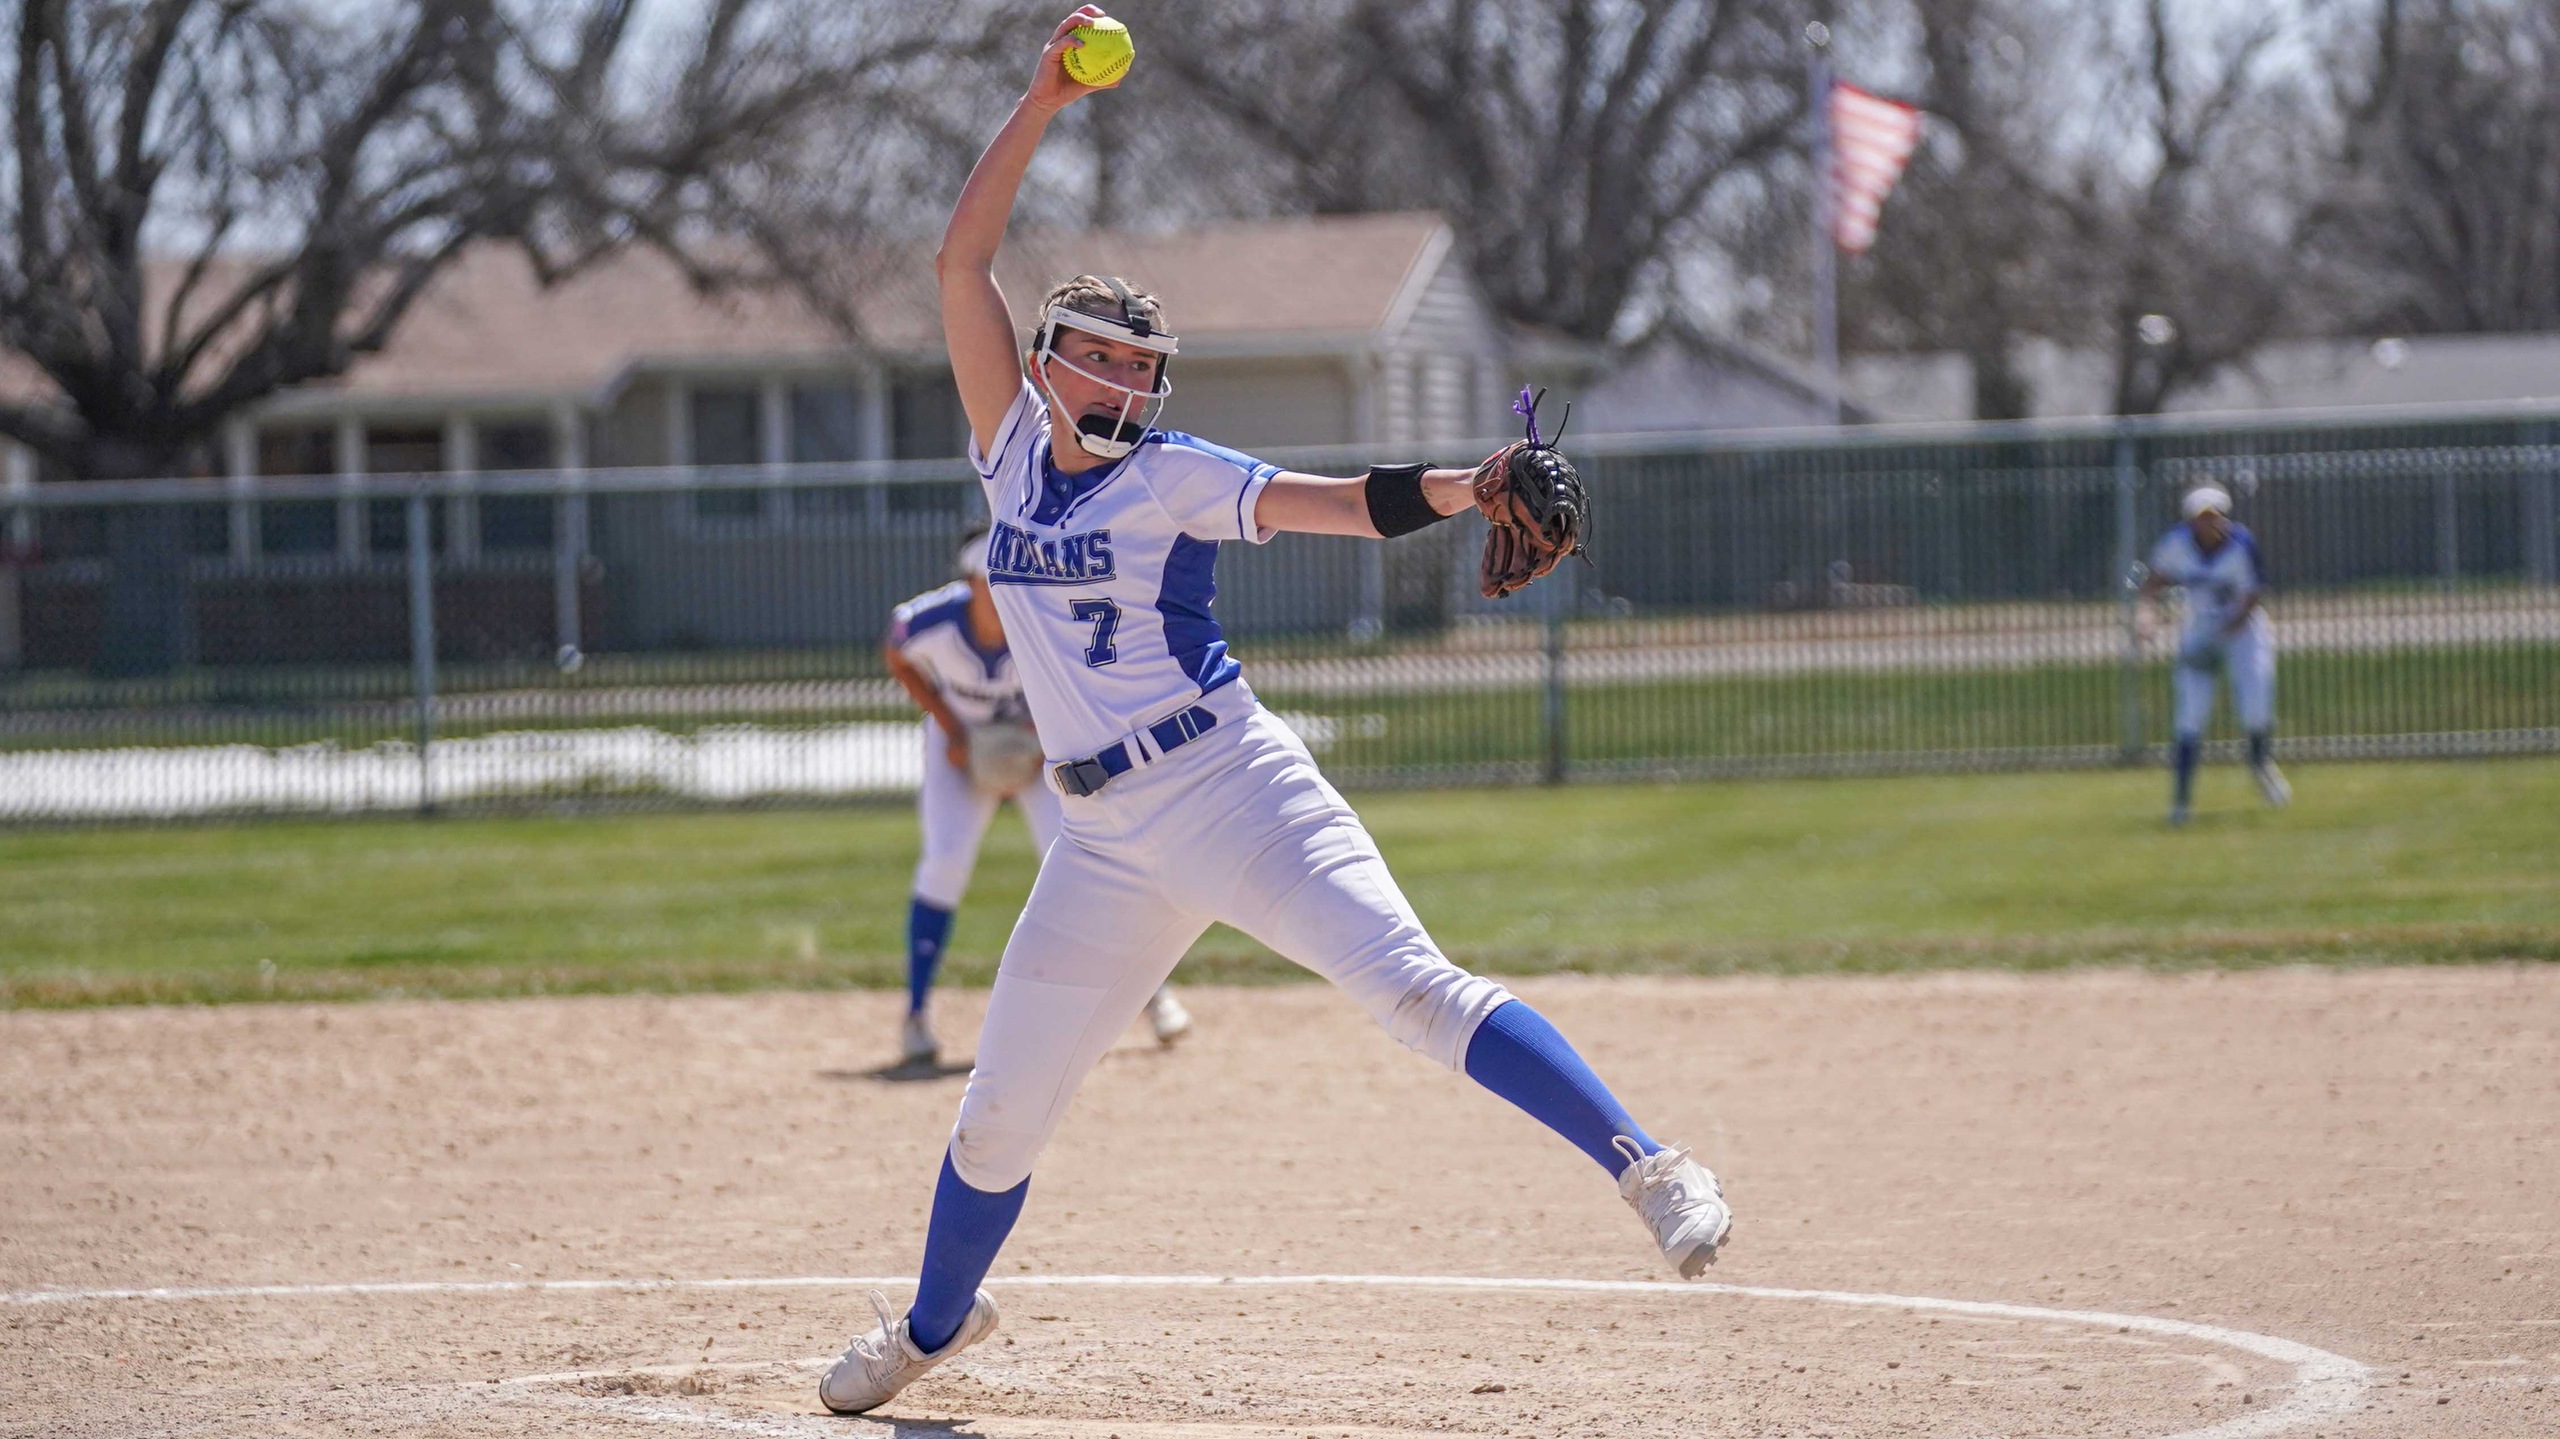 Lady Indians split Friday doubleheader with Otero JC